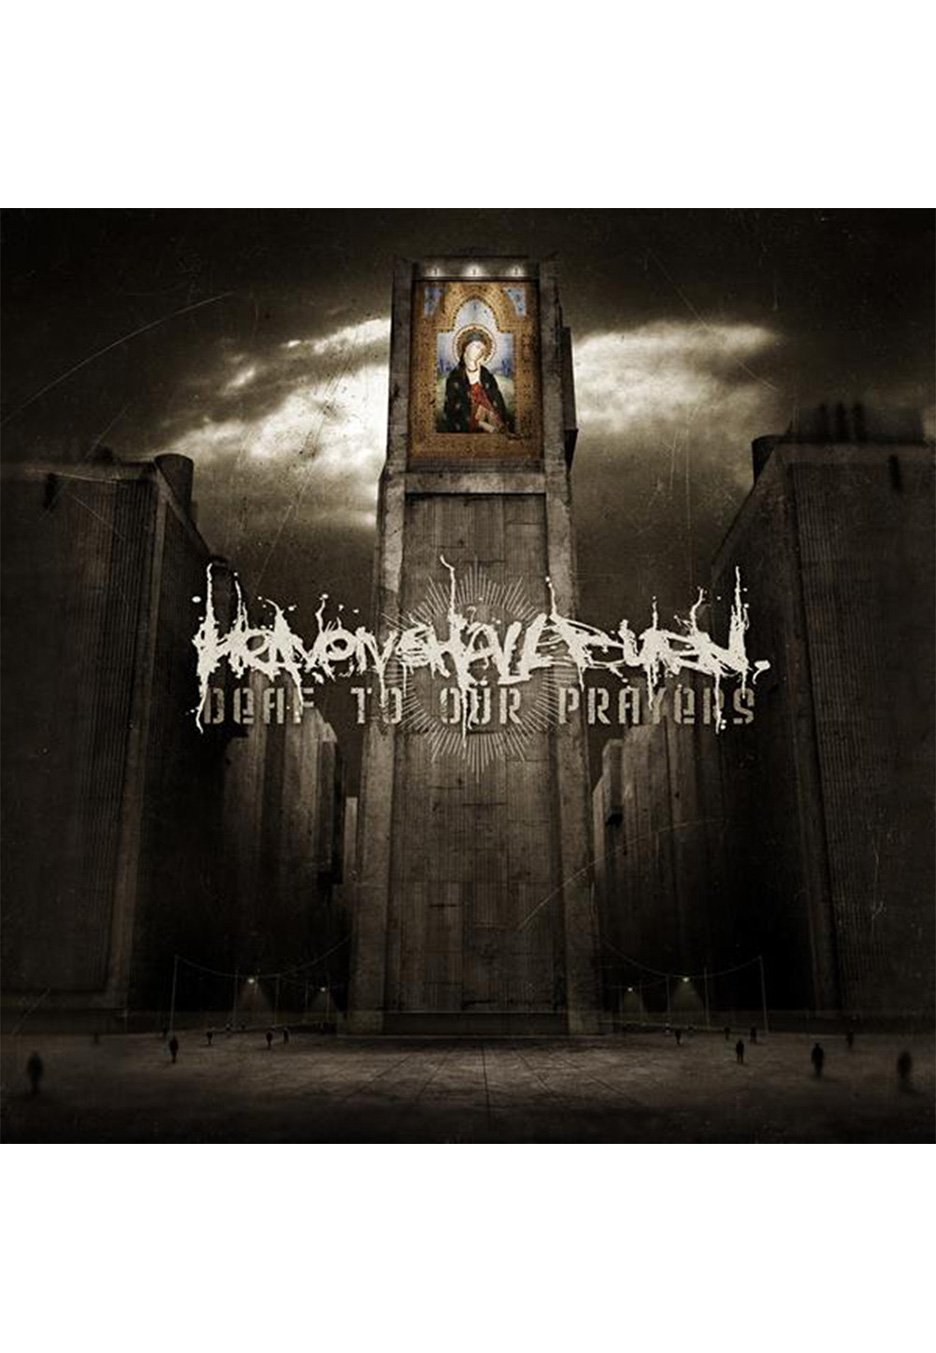 Heaven Shall Burn merch available online in the Nuclear Blast shop